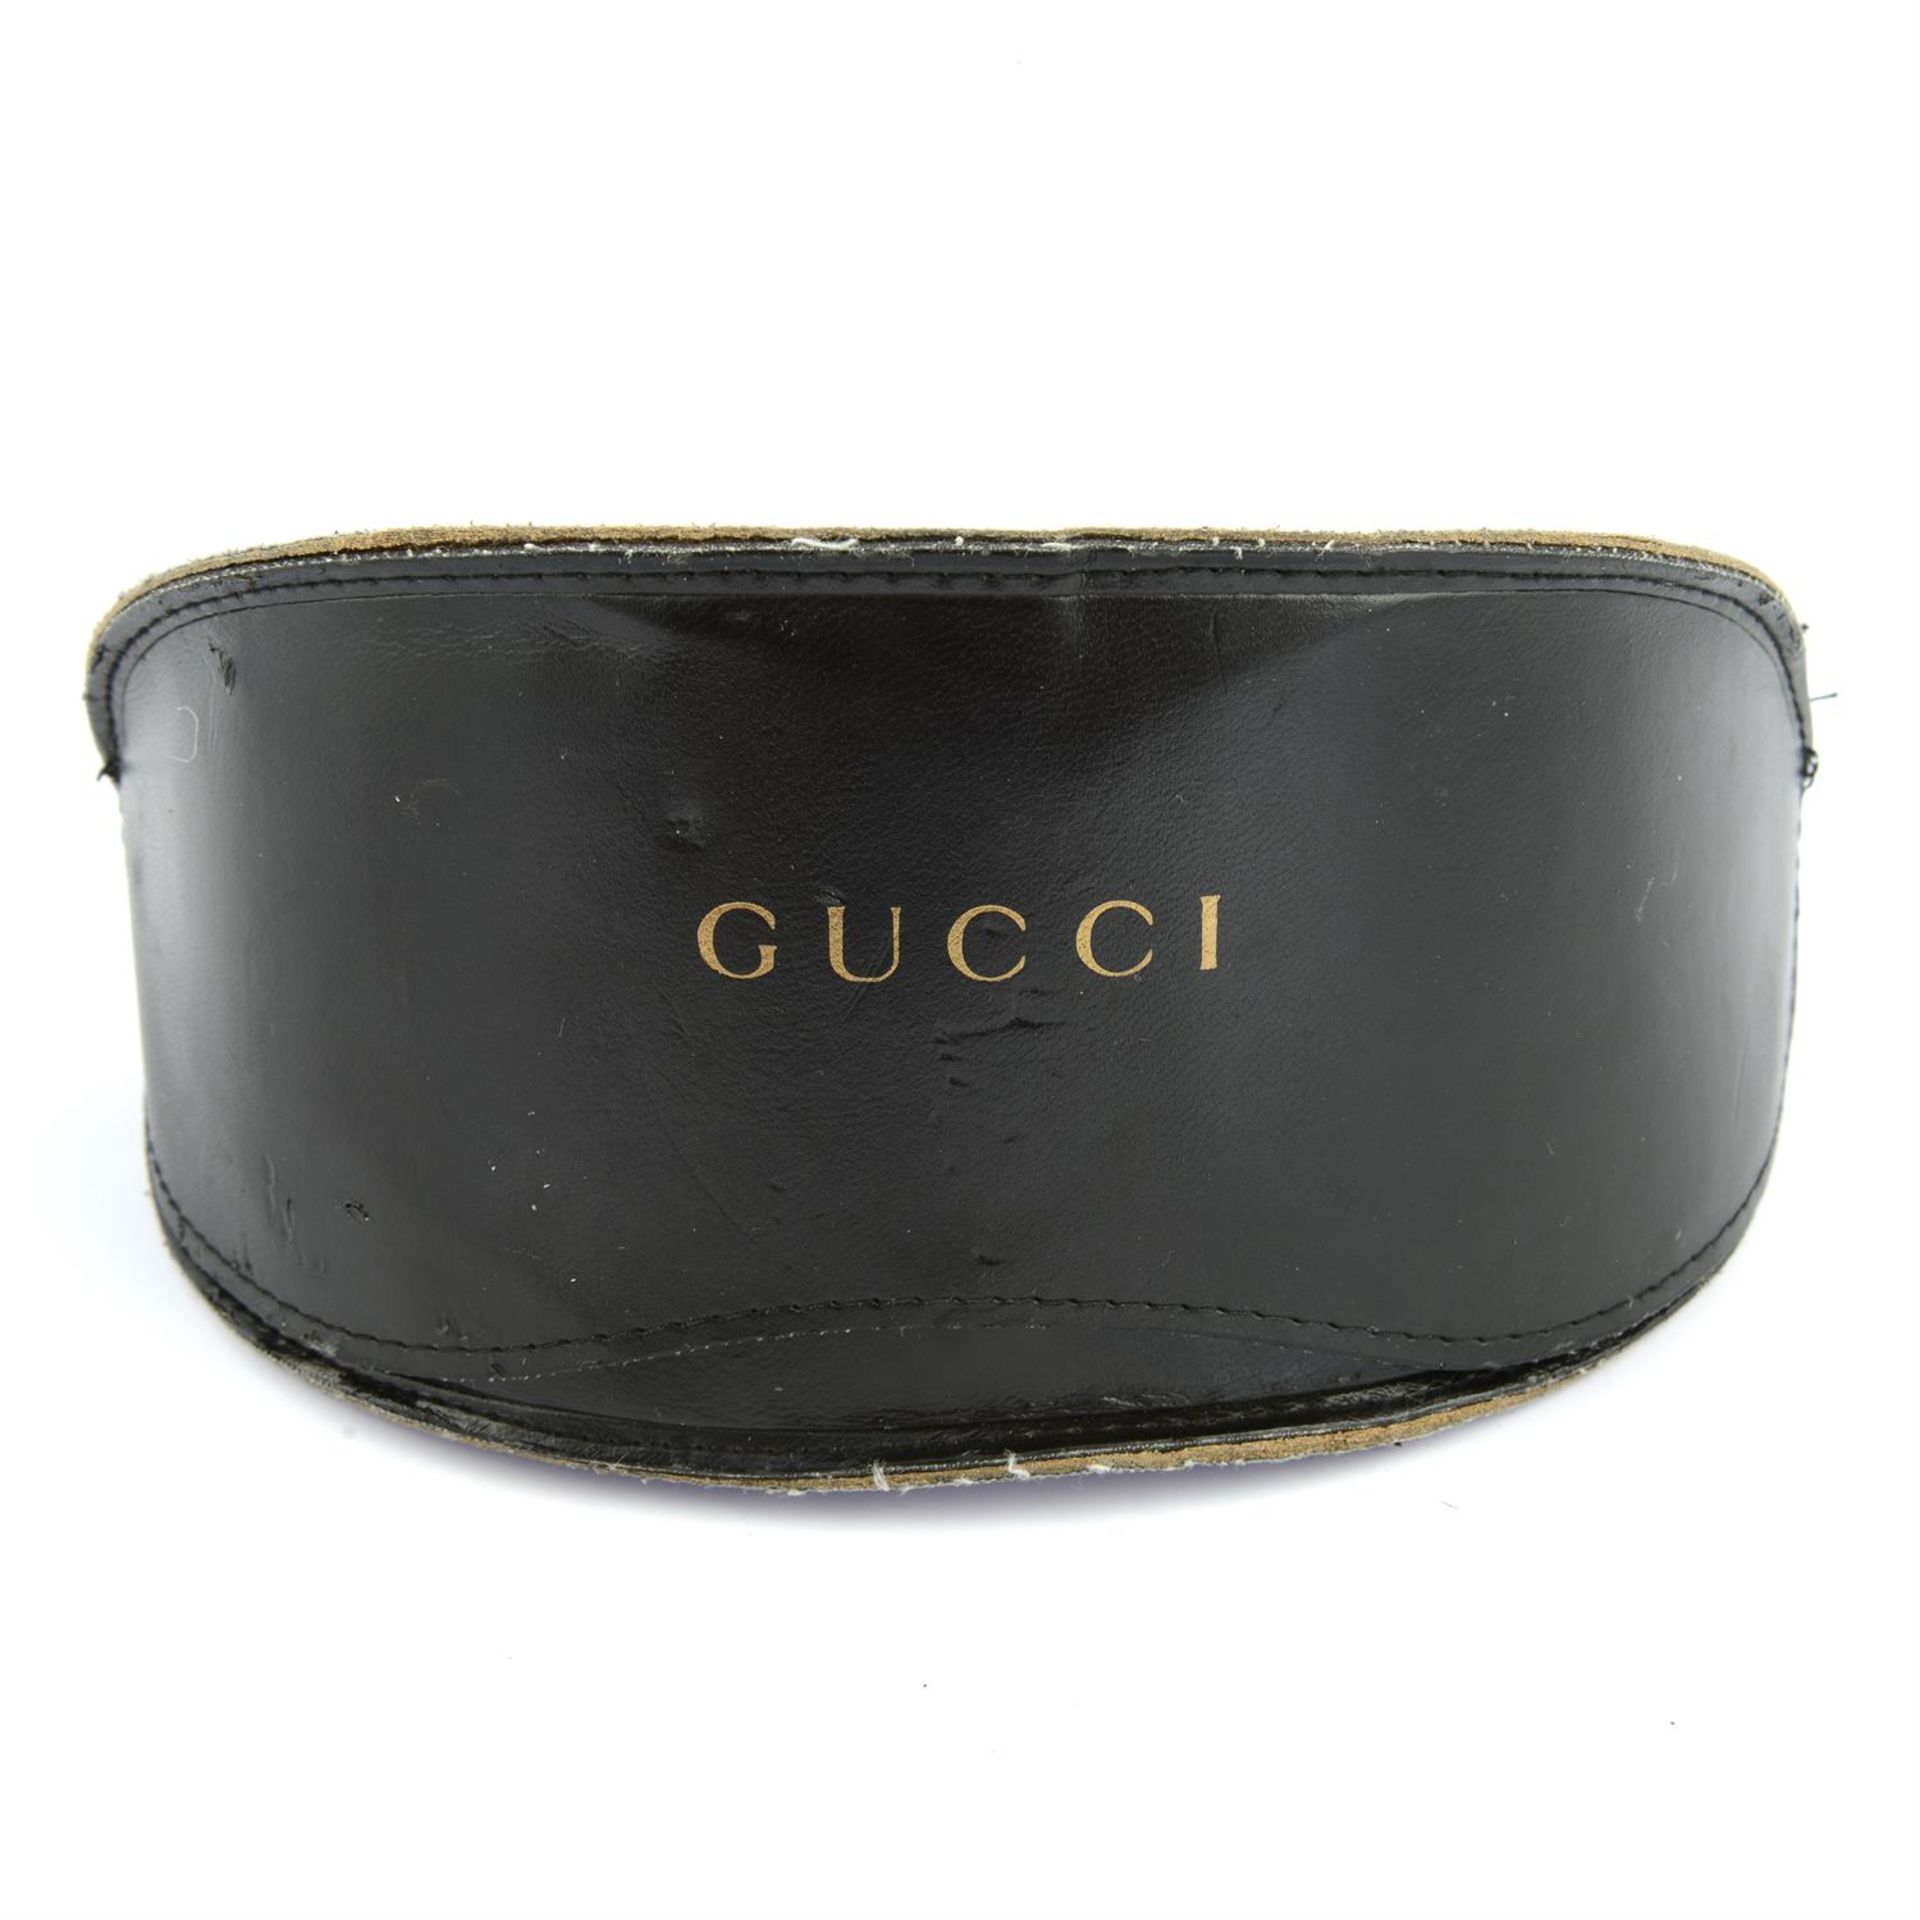 GUCCI - a pair of sunglasses. - Image 3 of 3